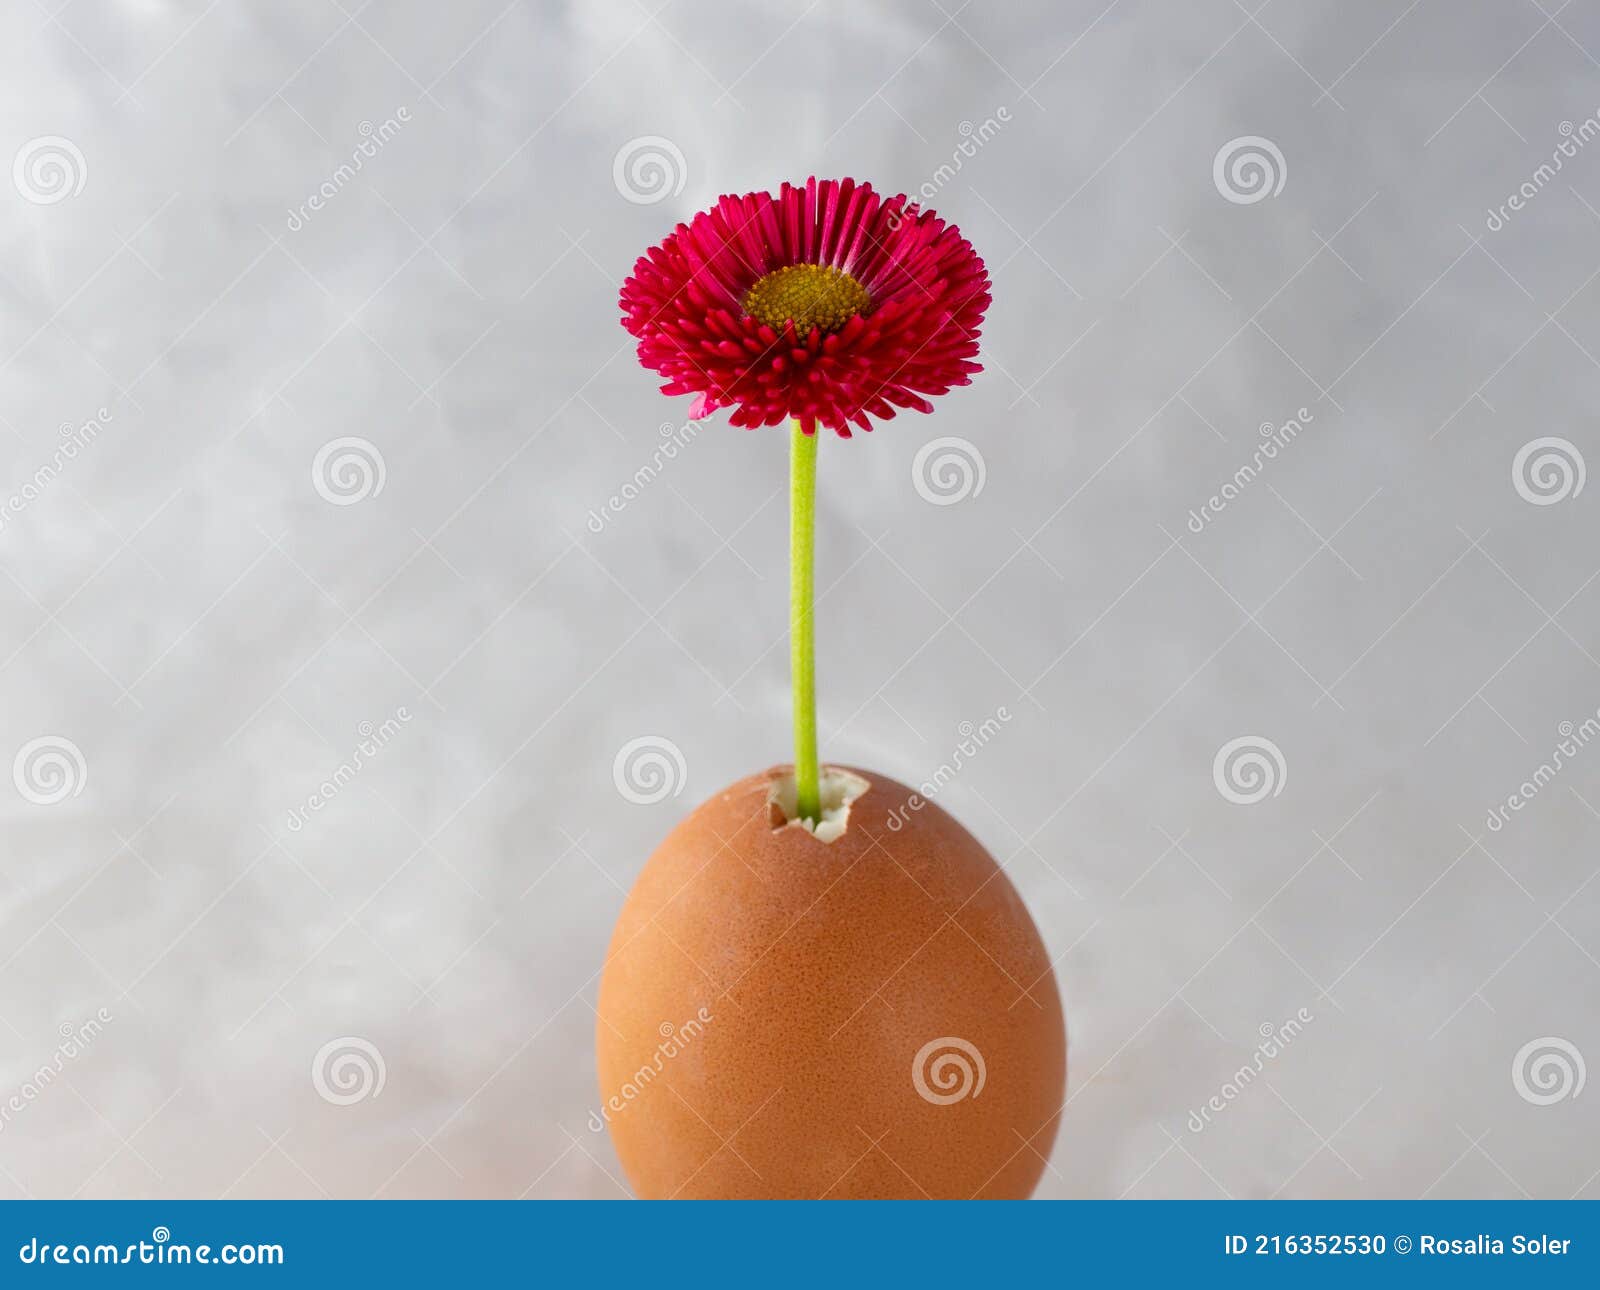 egg with a red flower